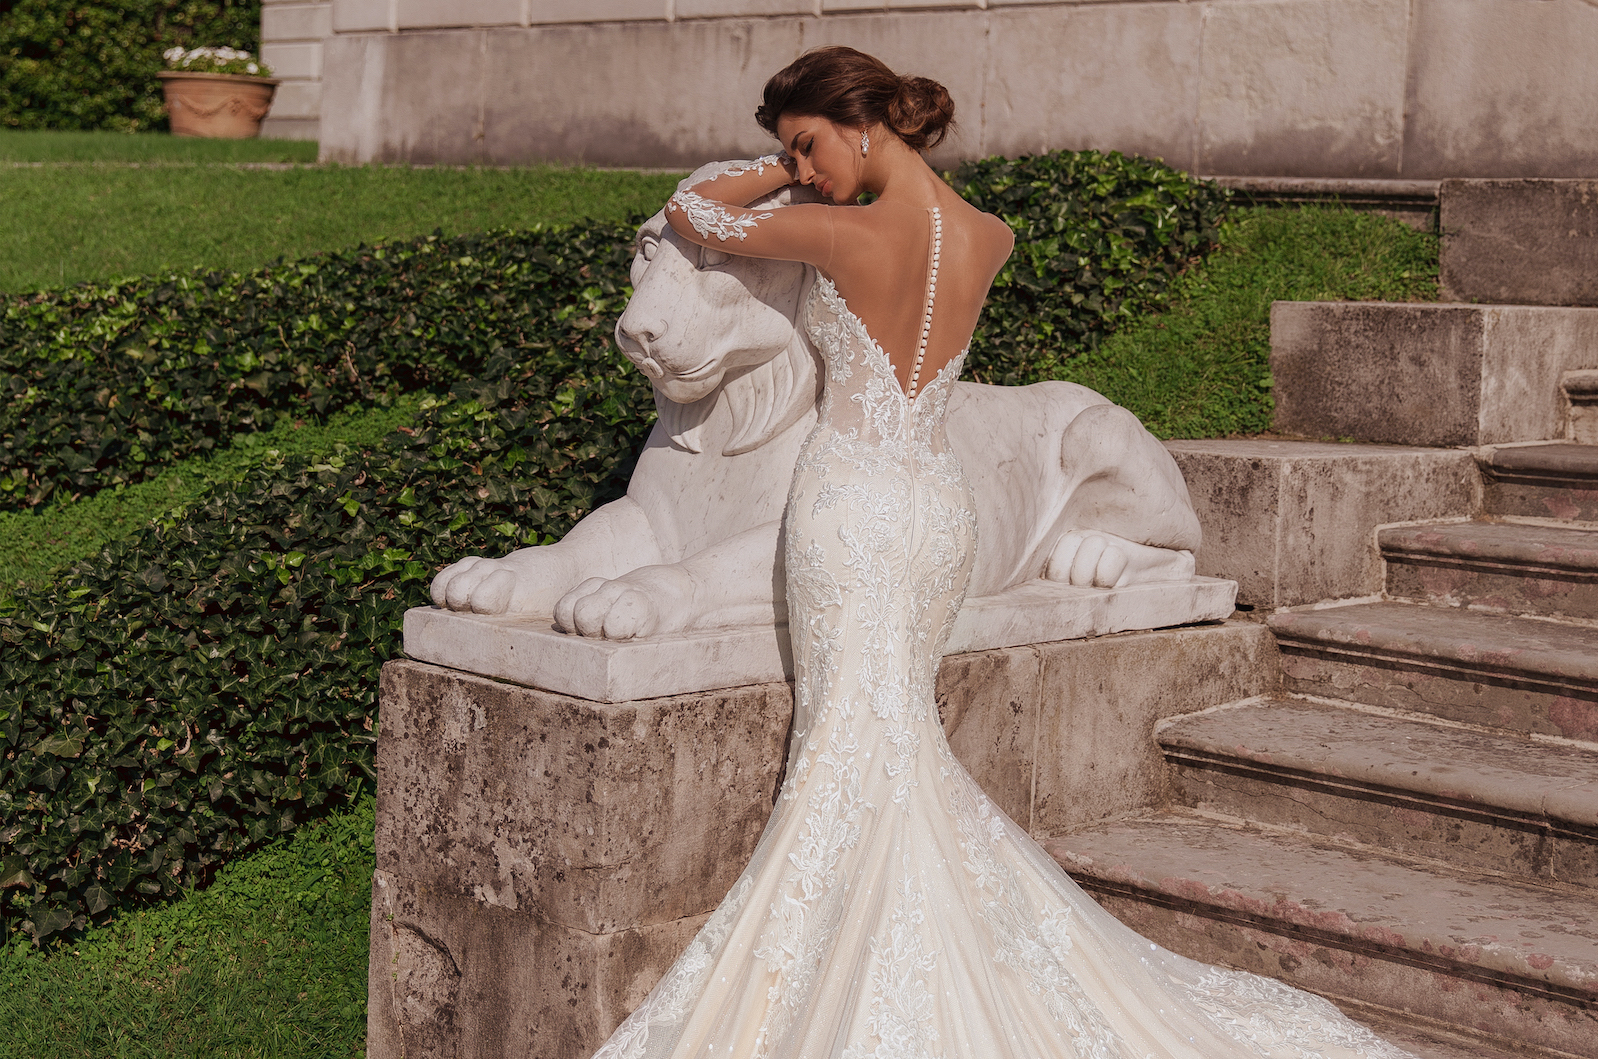 Wedding Dress Trends for Fall 2021